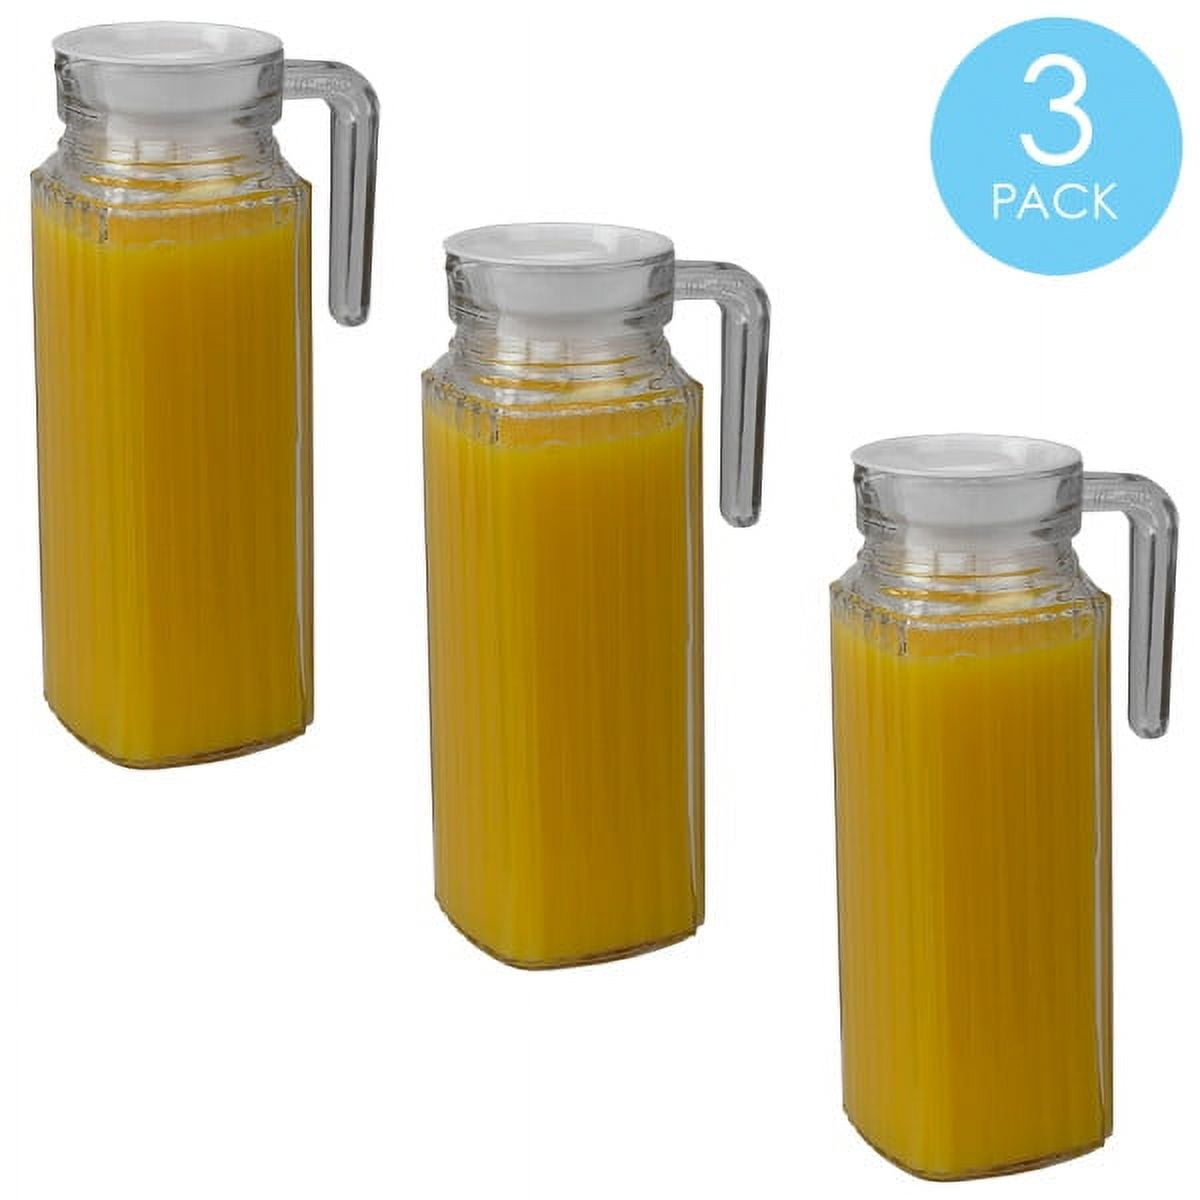 For the Best Glass Juice Bottles, NewRay is your #1 Option